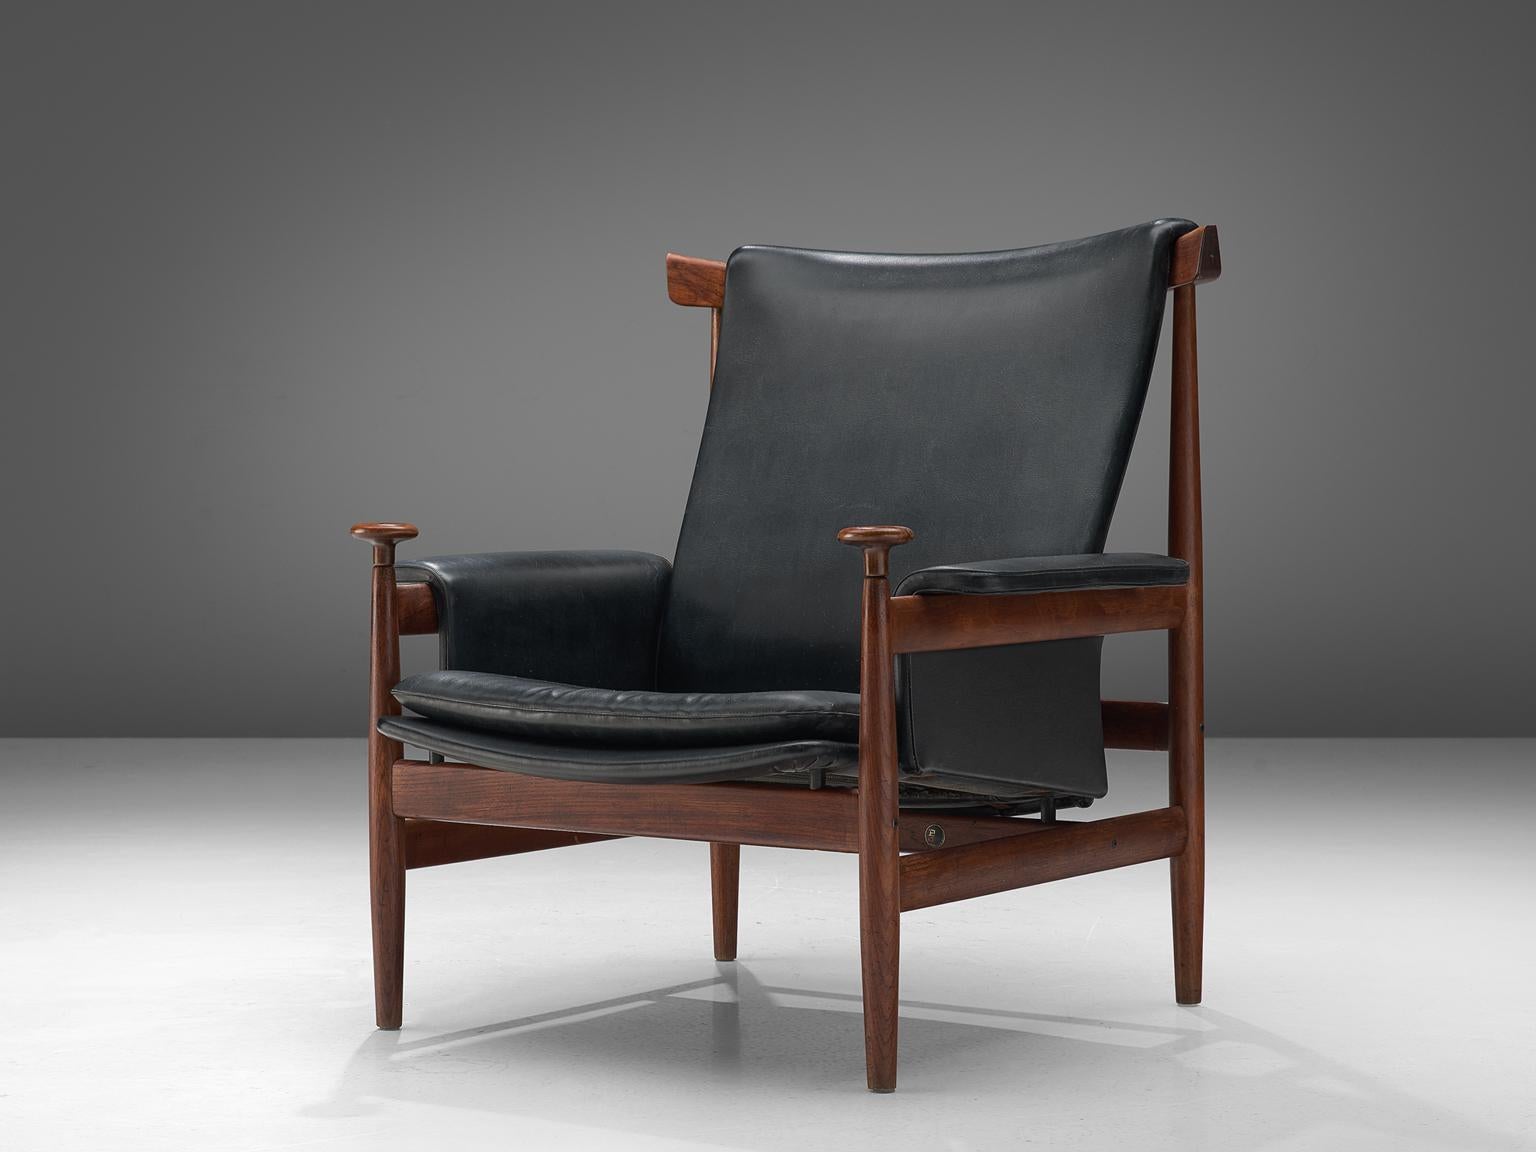 Finn Juhl for France and Son, 'Bwana' lounge chair, teak and black leather, Denmark, 1962 design, 1960s production.

This is an excellent solid teak version of Finn Juhl's 'Bwana' chair. The 